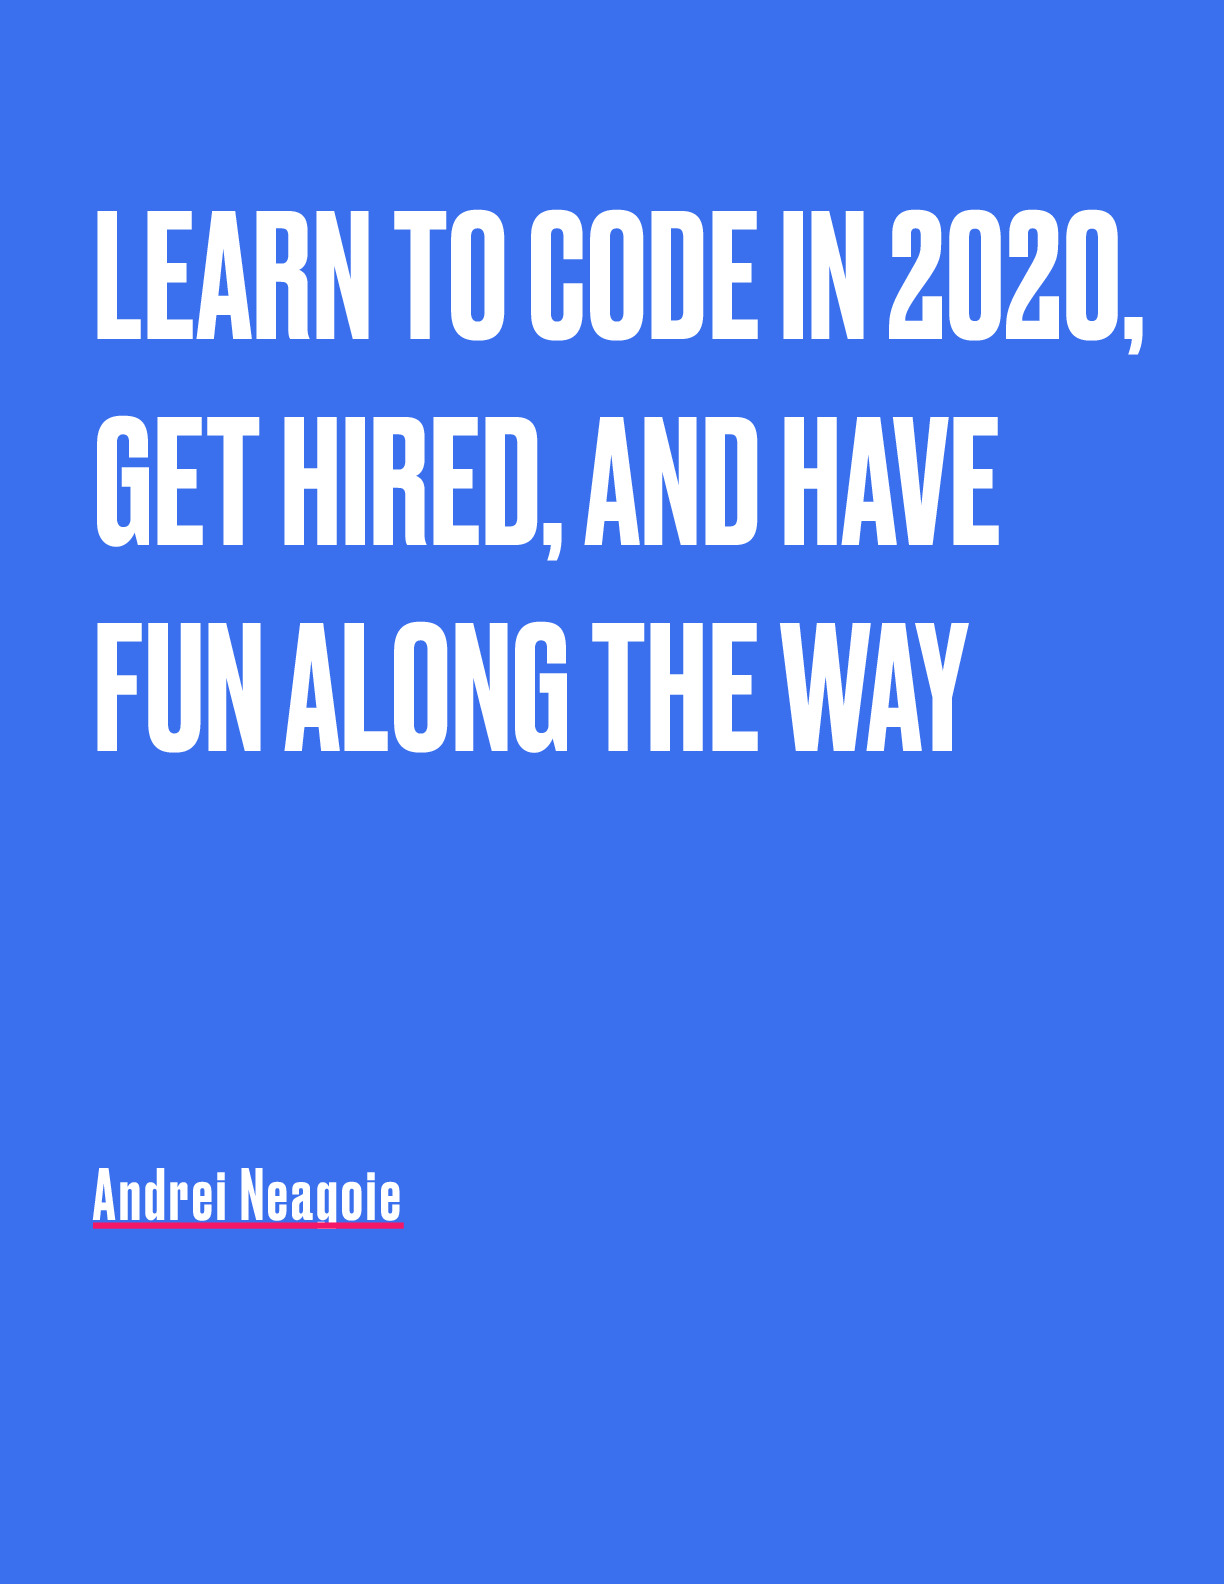 Learn_to_Code_and_Get_Hired_in_2020_by_Andrei_Neagoie